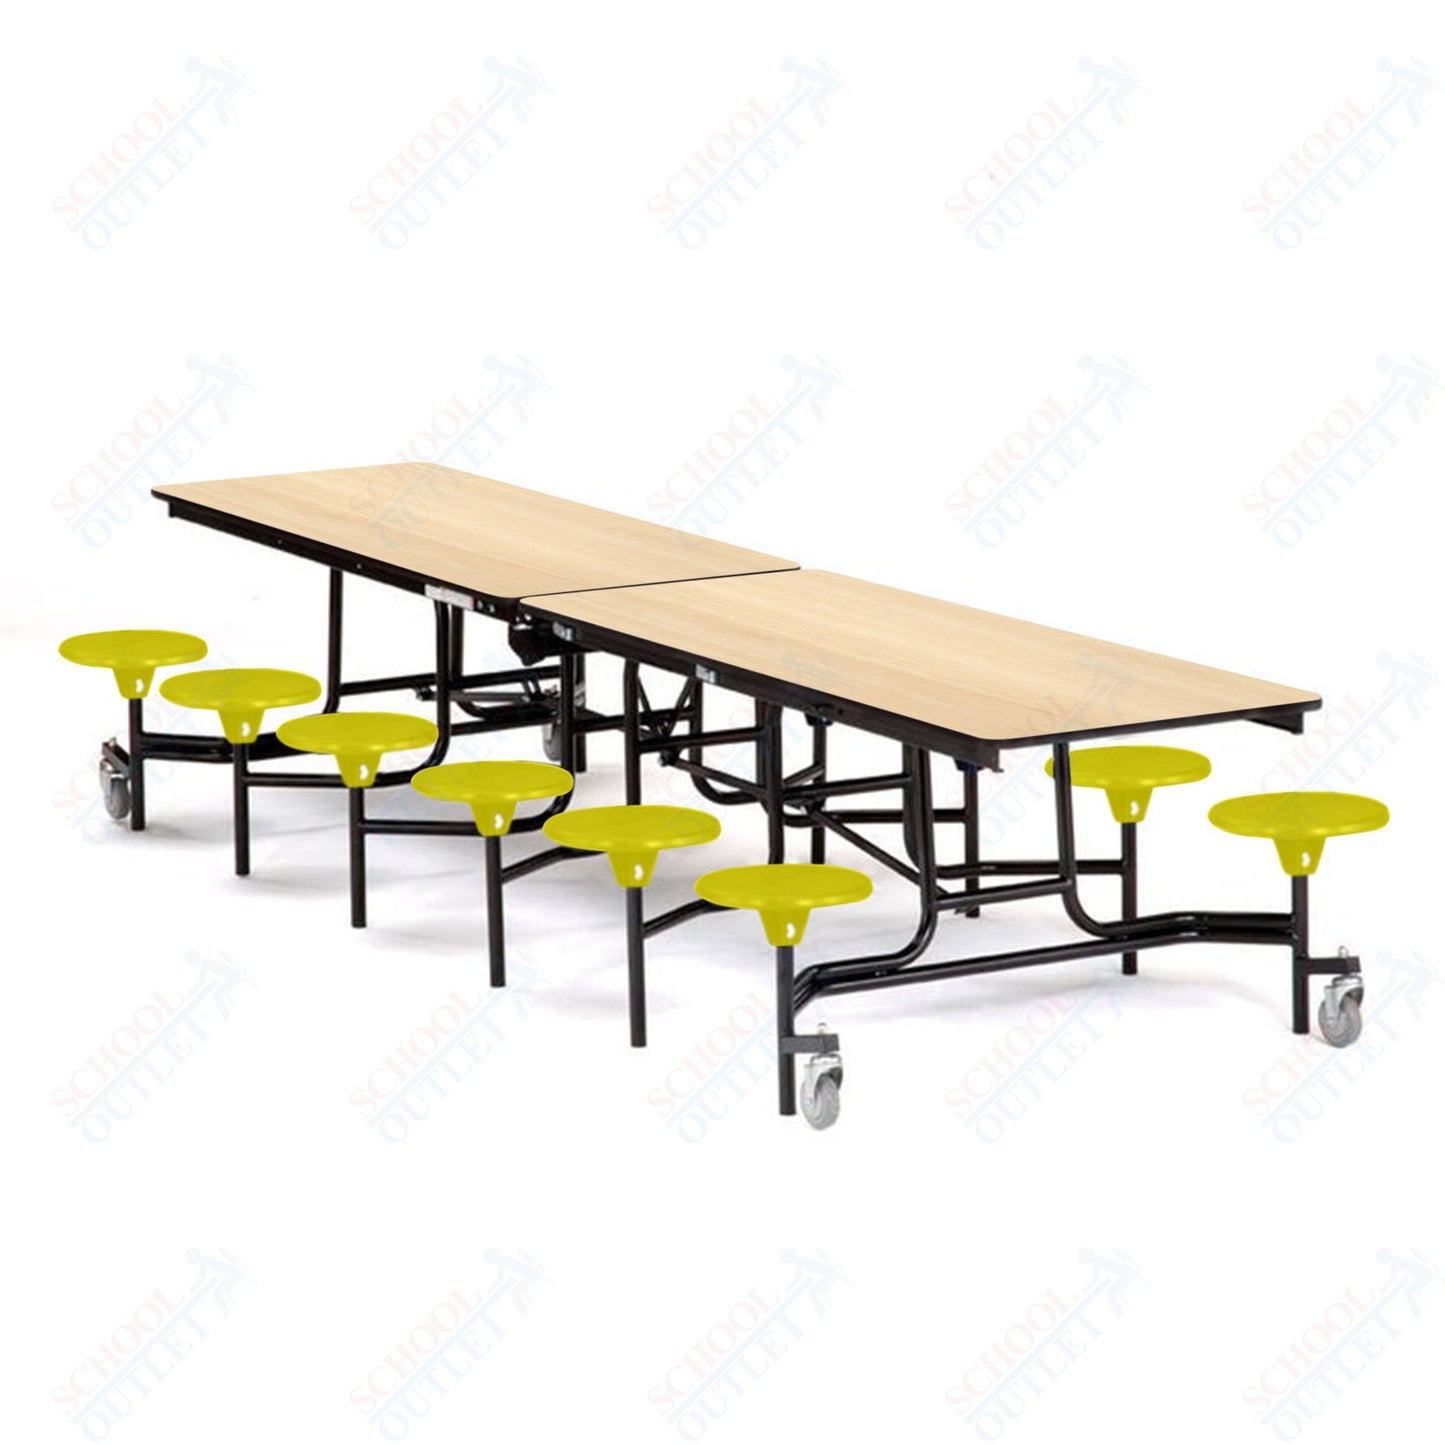 Mobile Cafeteria Lunchroom Stool Table - 30" W x 12' L - 12 Stools - Plywood Core - Protect Edge - Black Powdercoated Frame